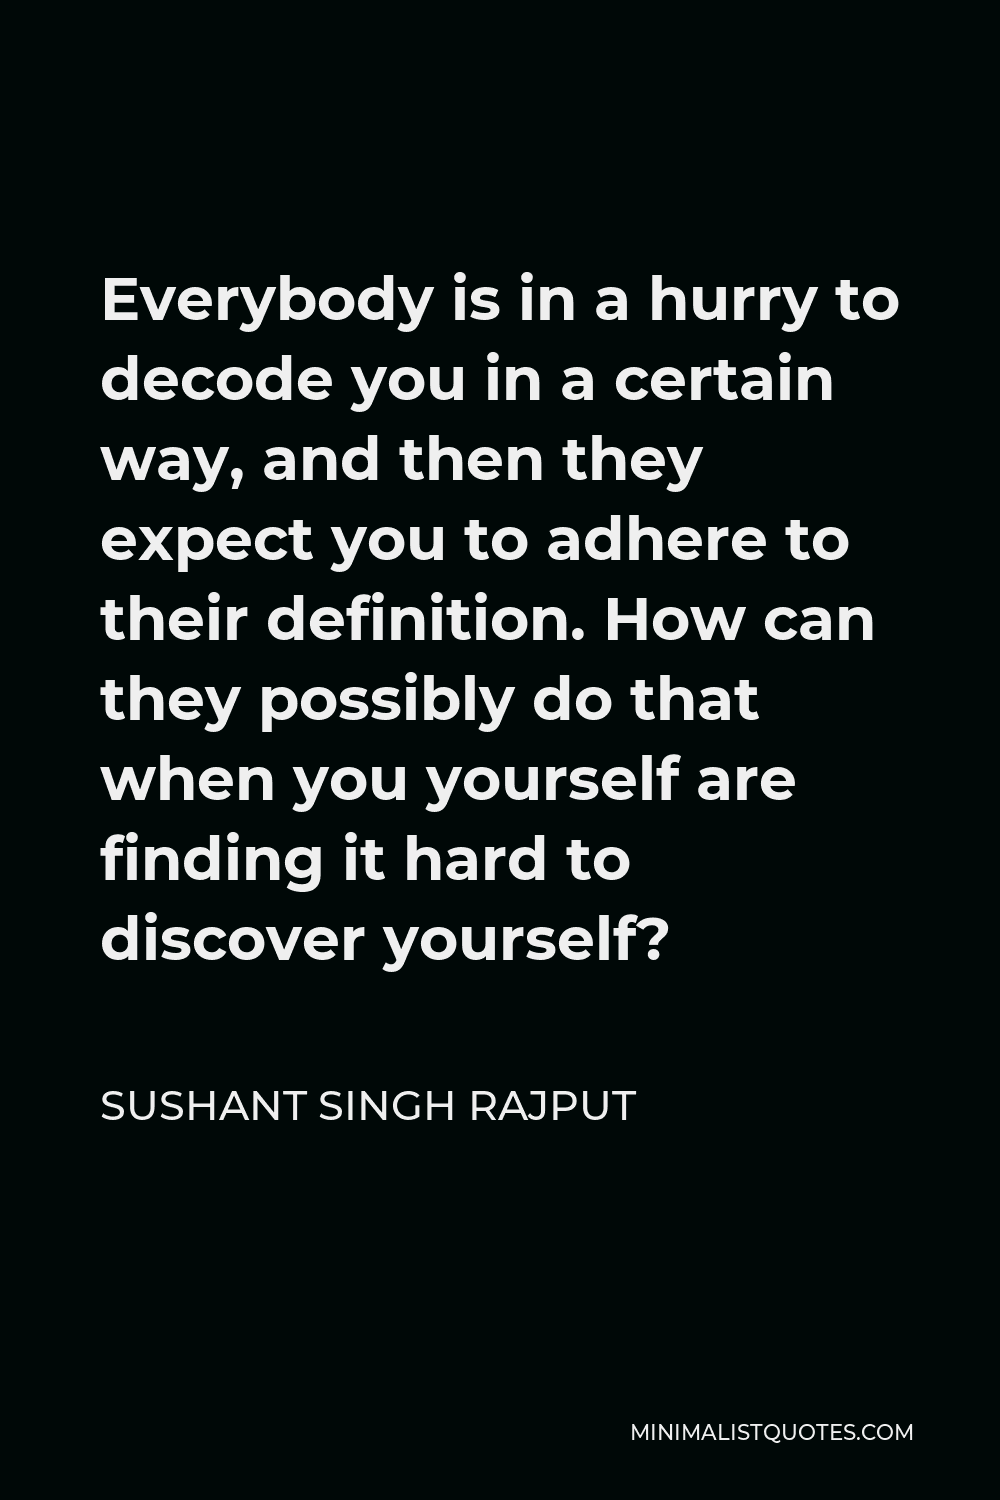 Sushant Singh Rajput Quote - Everybody is in a hurry to decode you in a certain way, and then they expect you to adhere to their definition. How can they possibly do that when you yourself are finding it hard to discover yourself?